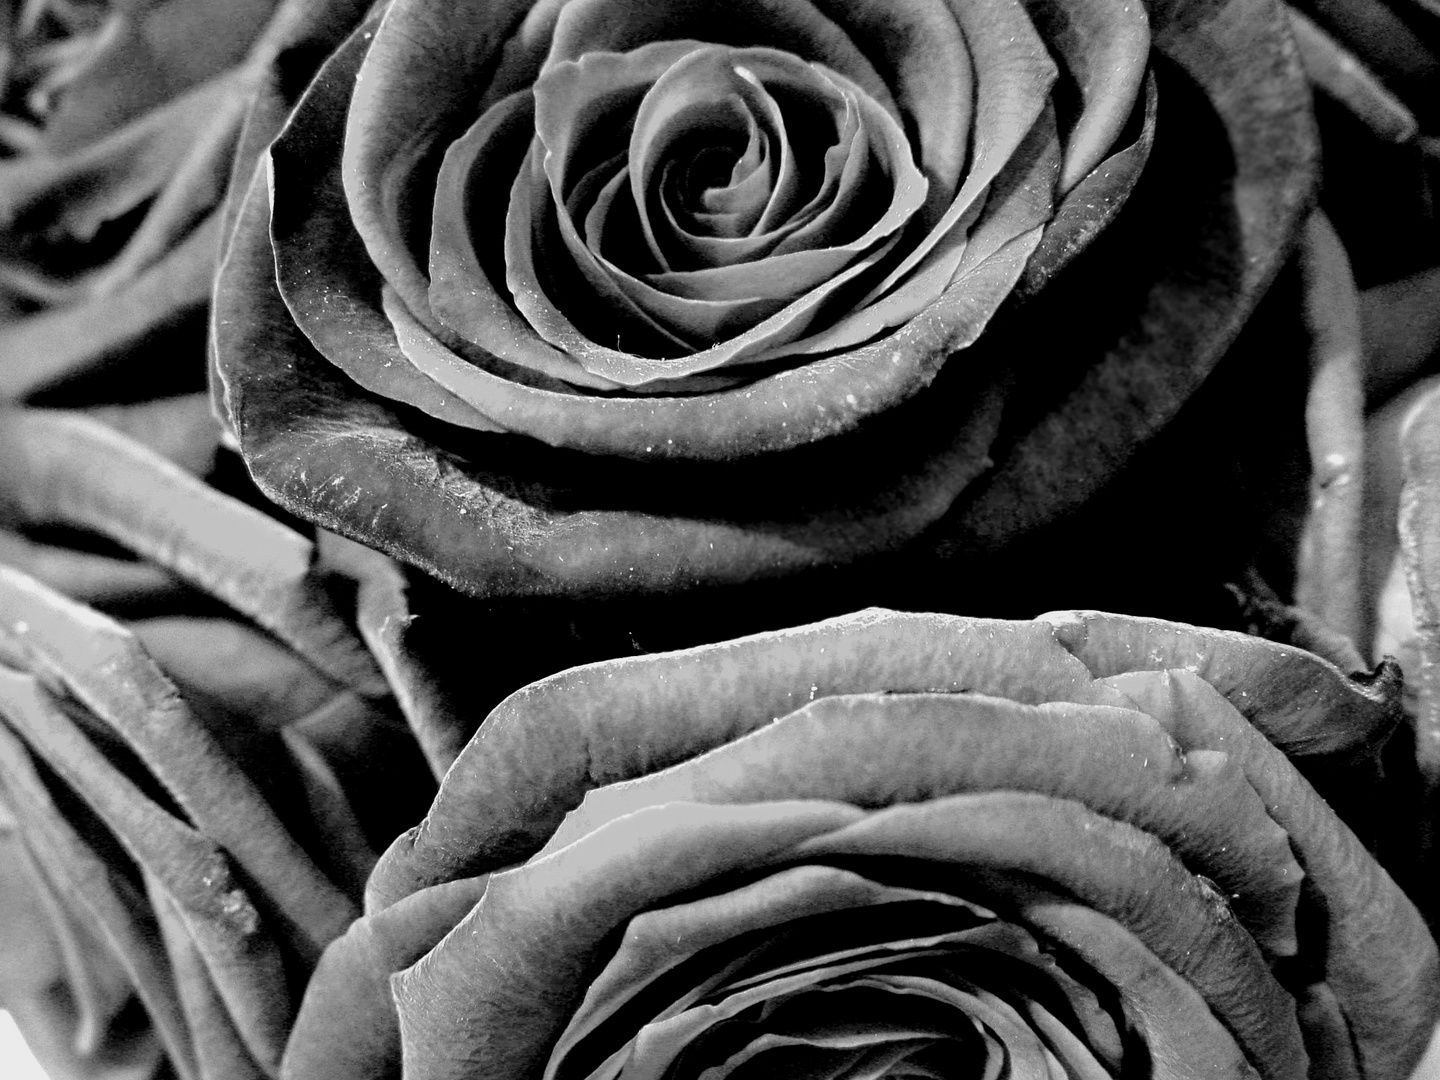 Just roses III